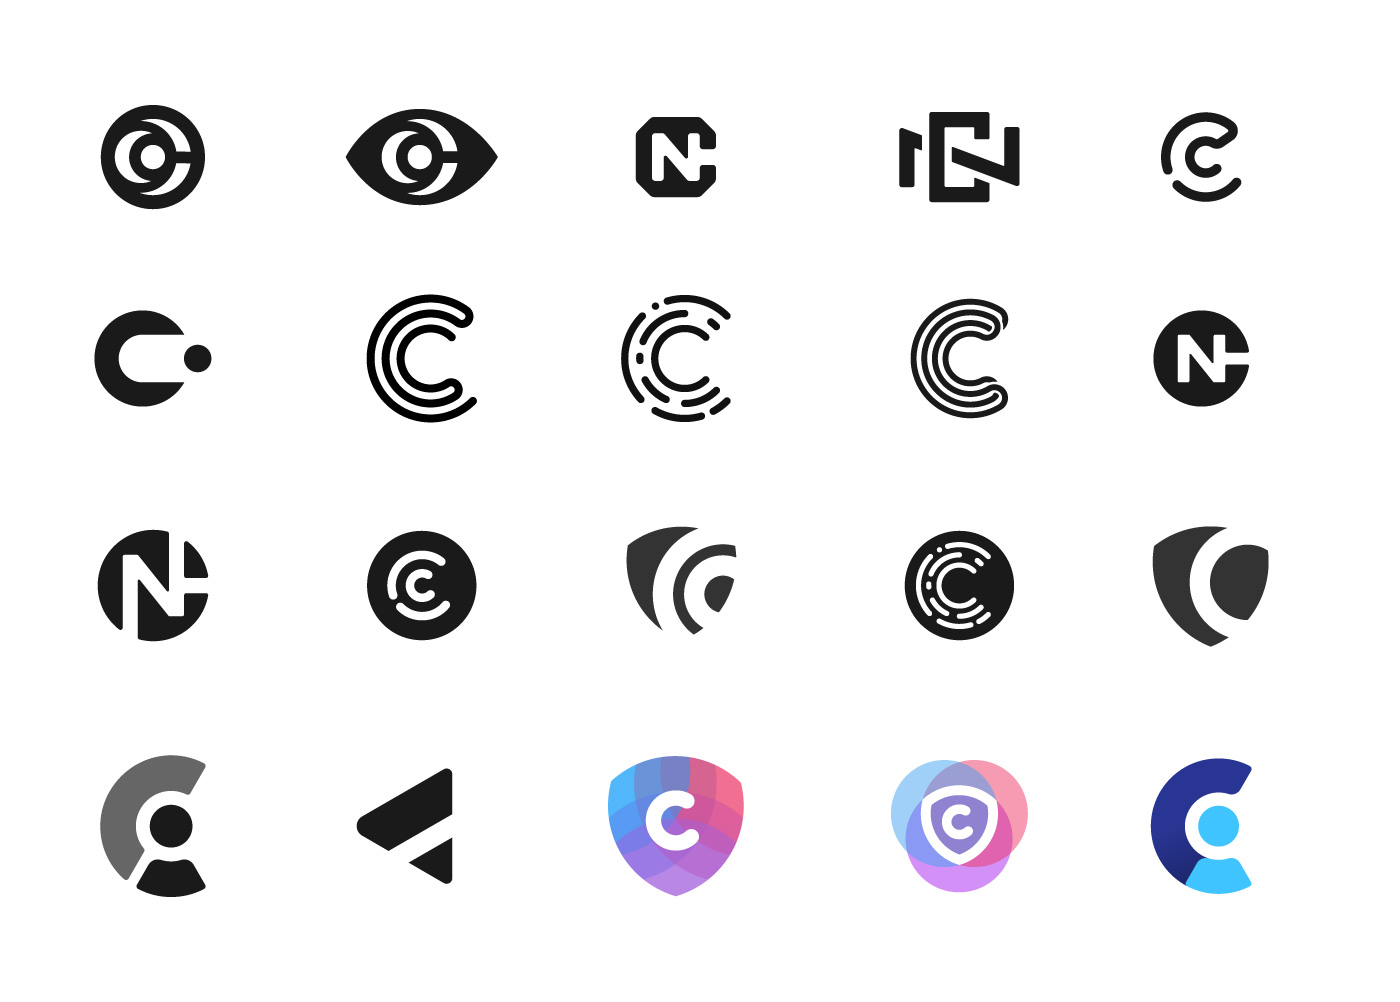 Lots of "C" Brand Iterations - 2018